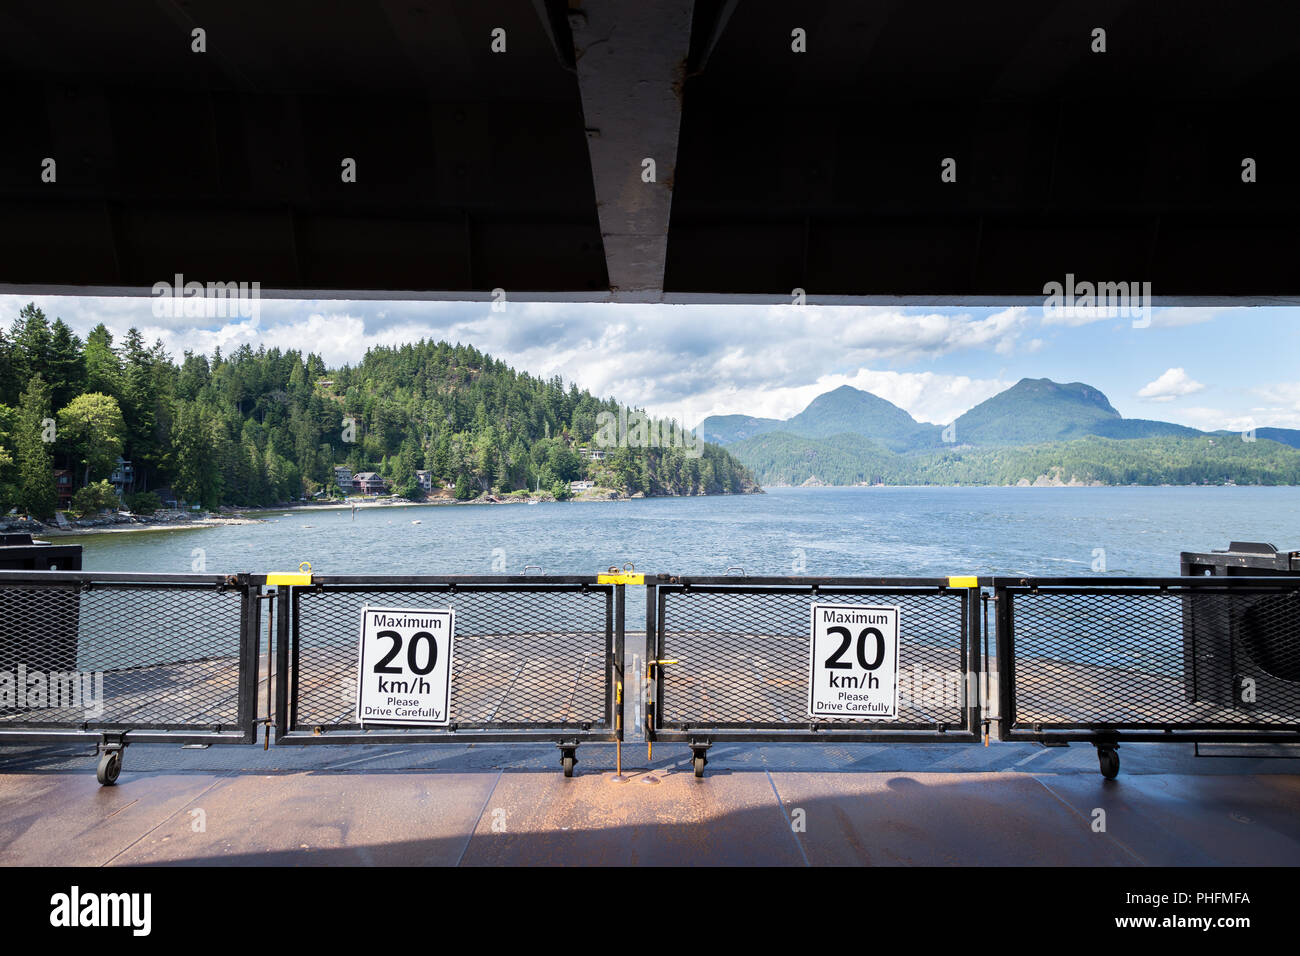 A view of the Sunshine Coast as seen from the deck of a ferry. Stock Photo